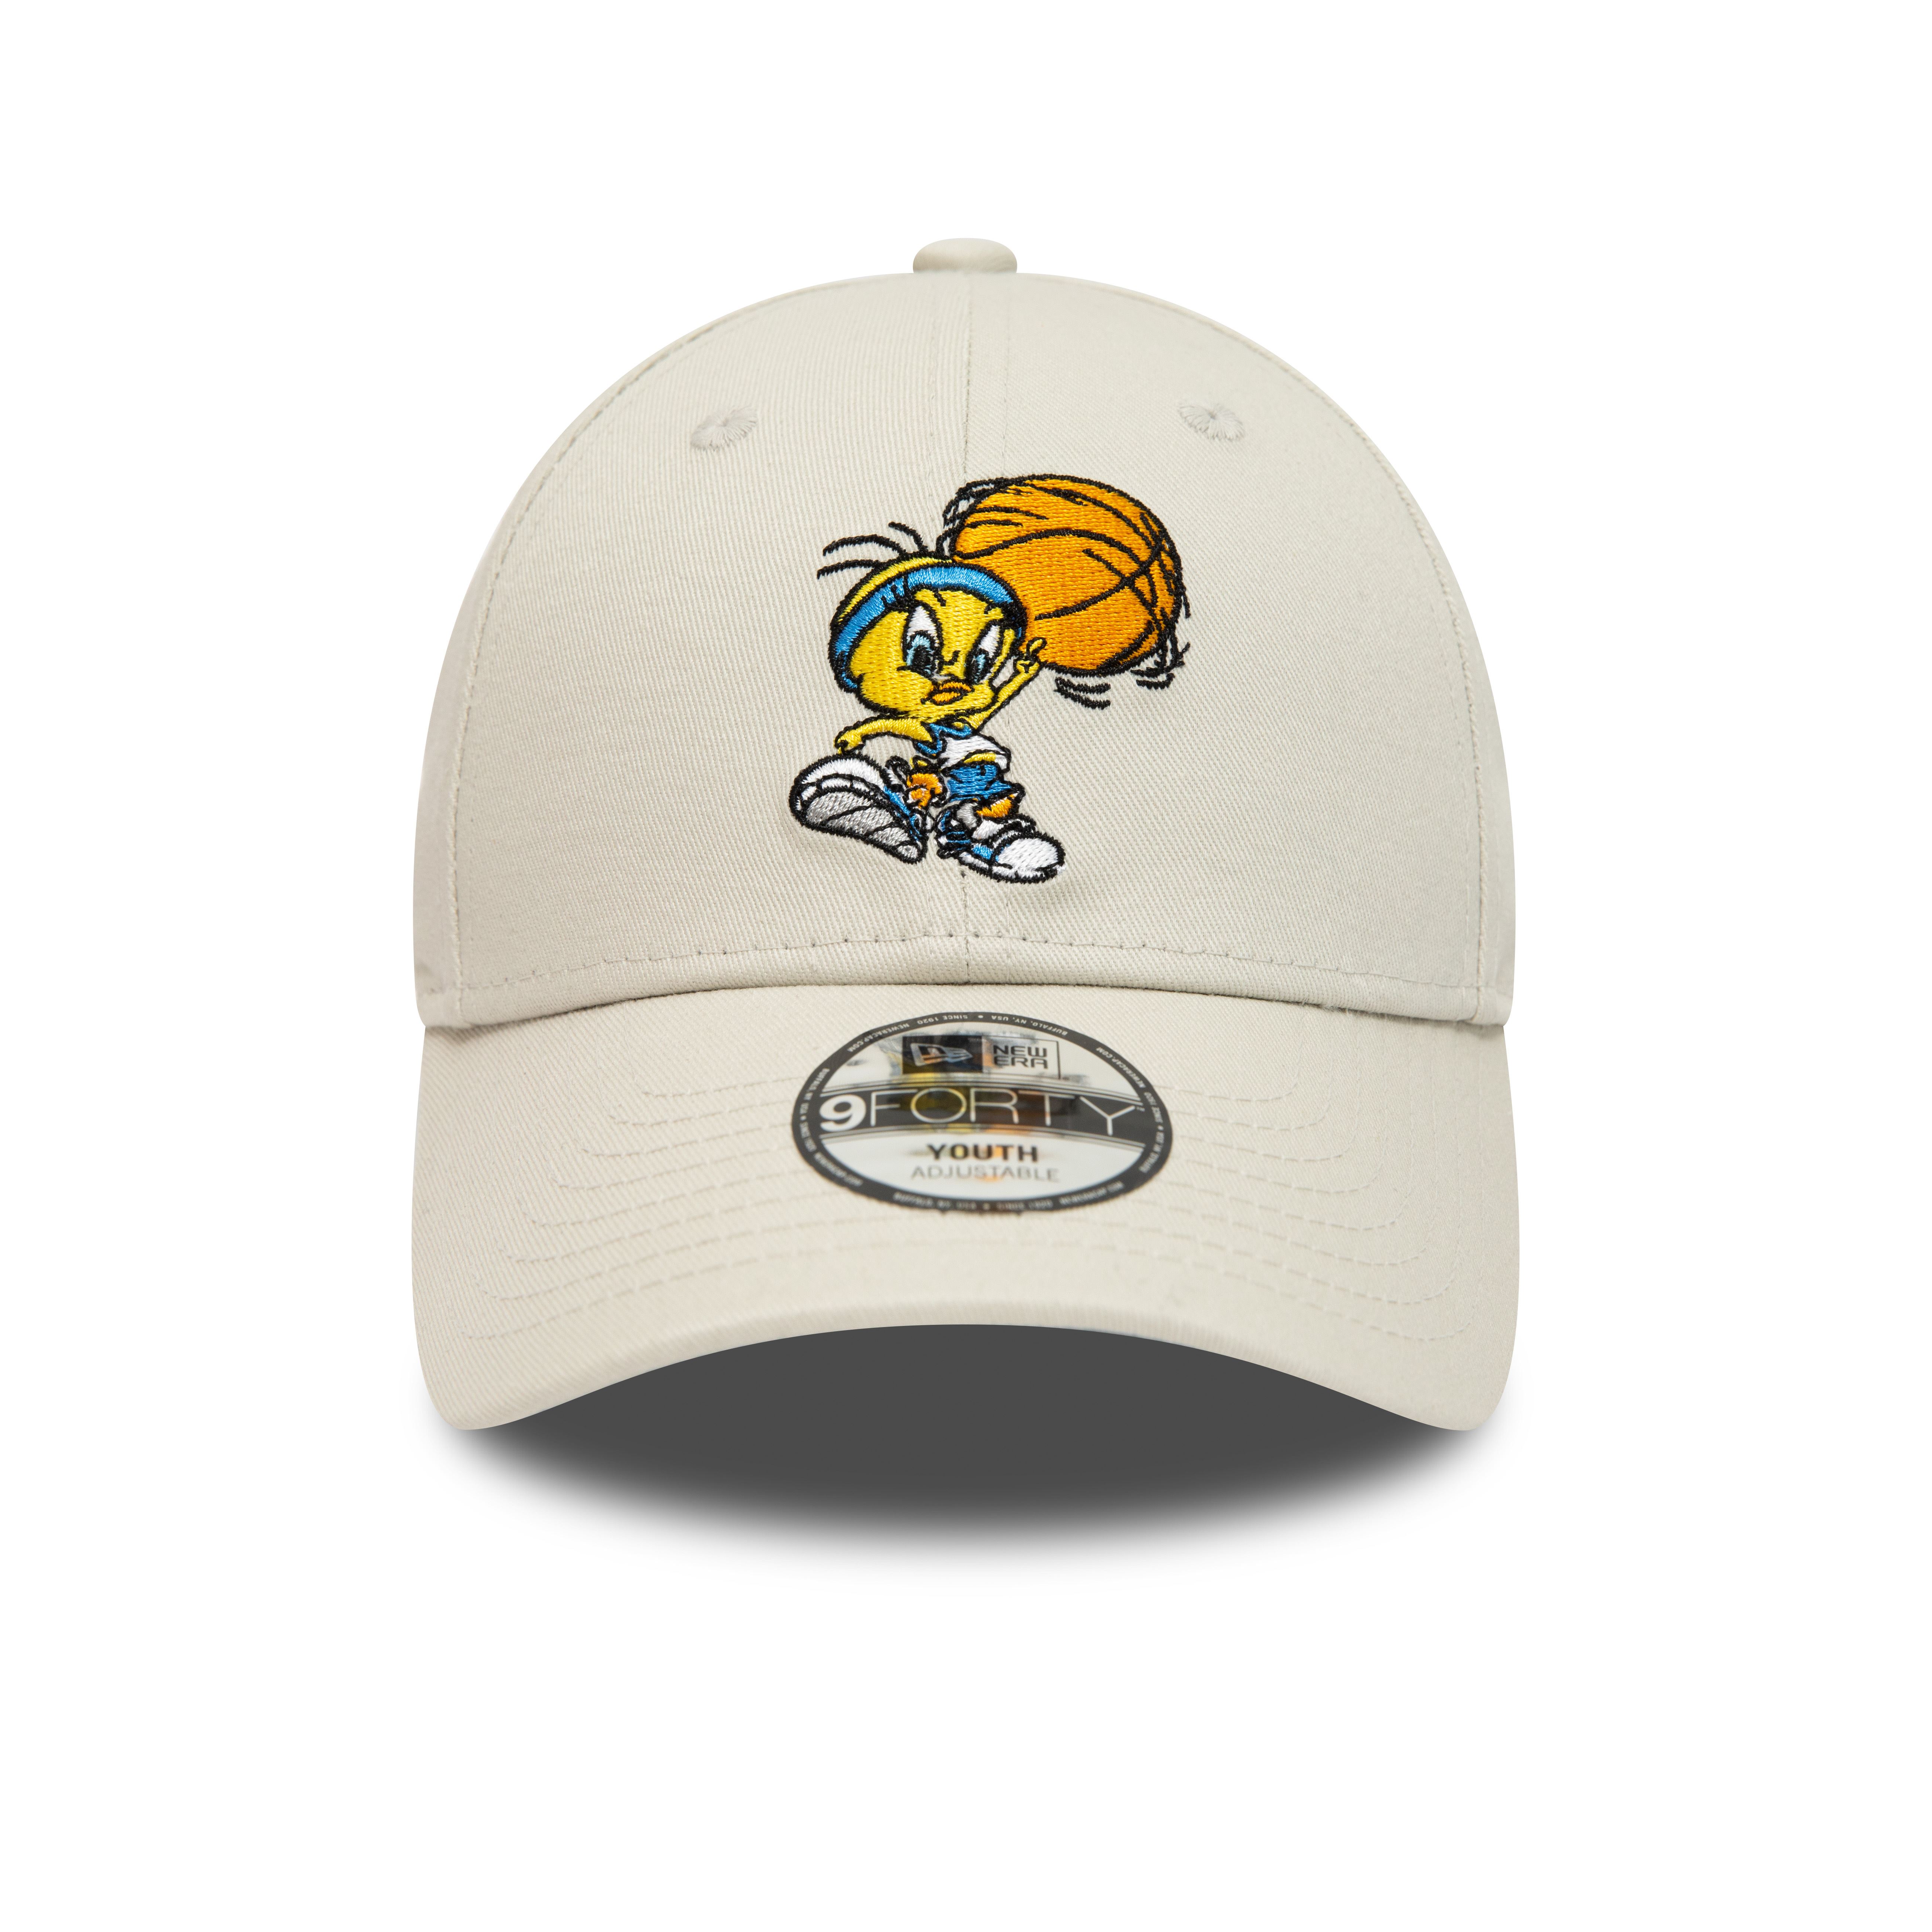 Tweety Looney Tunes Character Sporty Beige 9Forty Adjustable Cap for Kids New Era